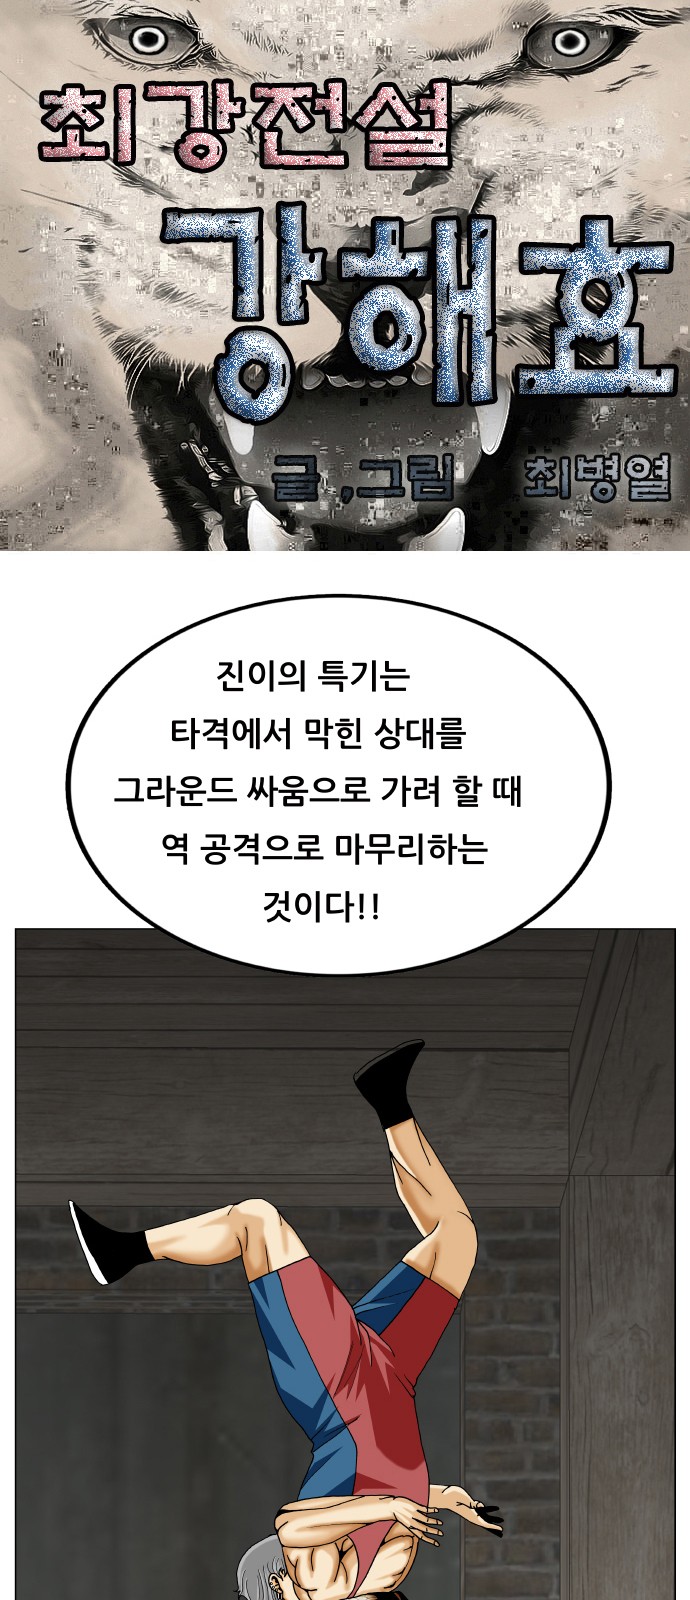 Ultimate Legend - Kang Hae Hyo - Chapter 418 - Page 1